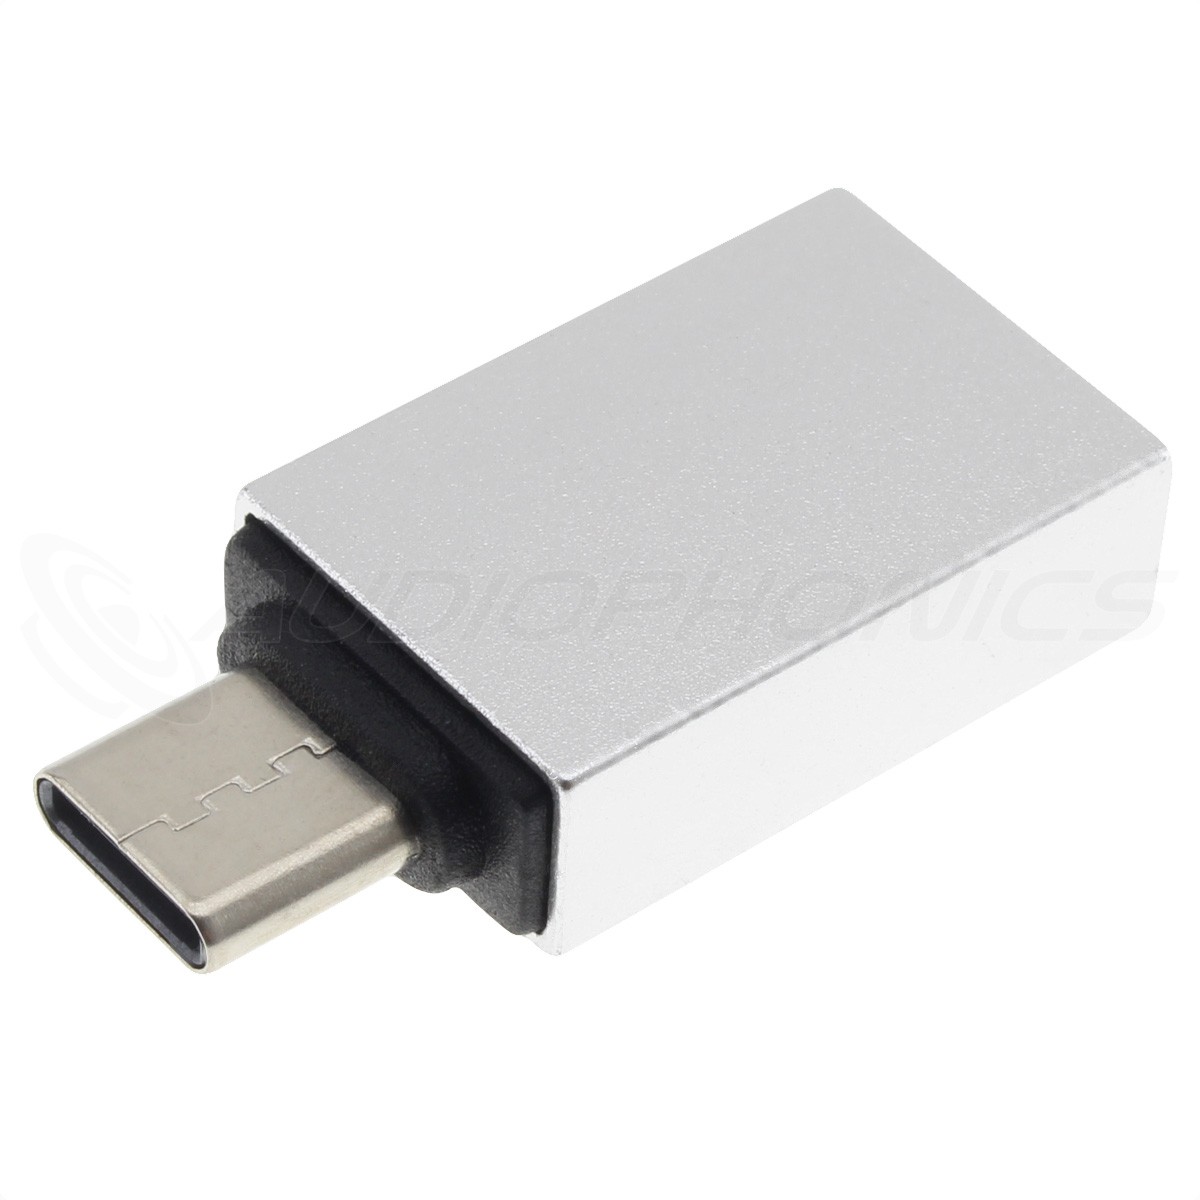 Female USB-A 3.0 to Male USB-C 3.1 Adapter OTG Silver